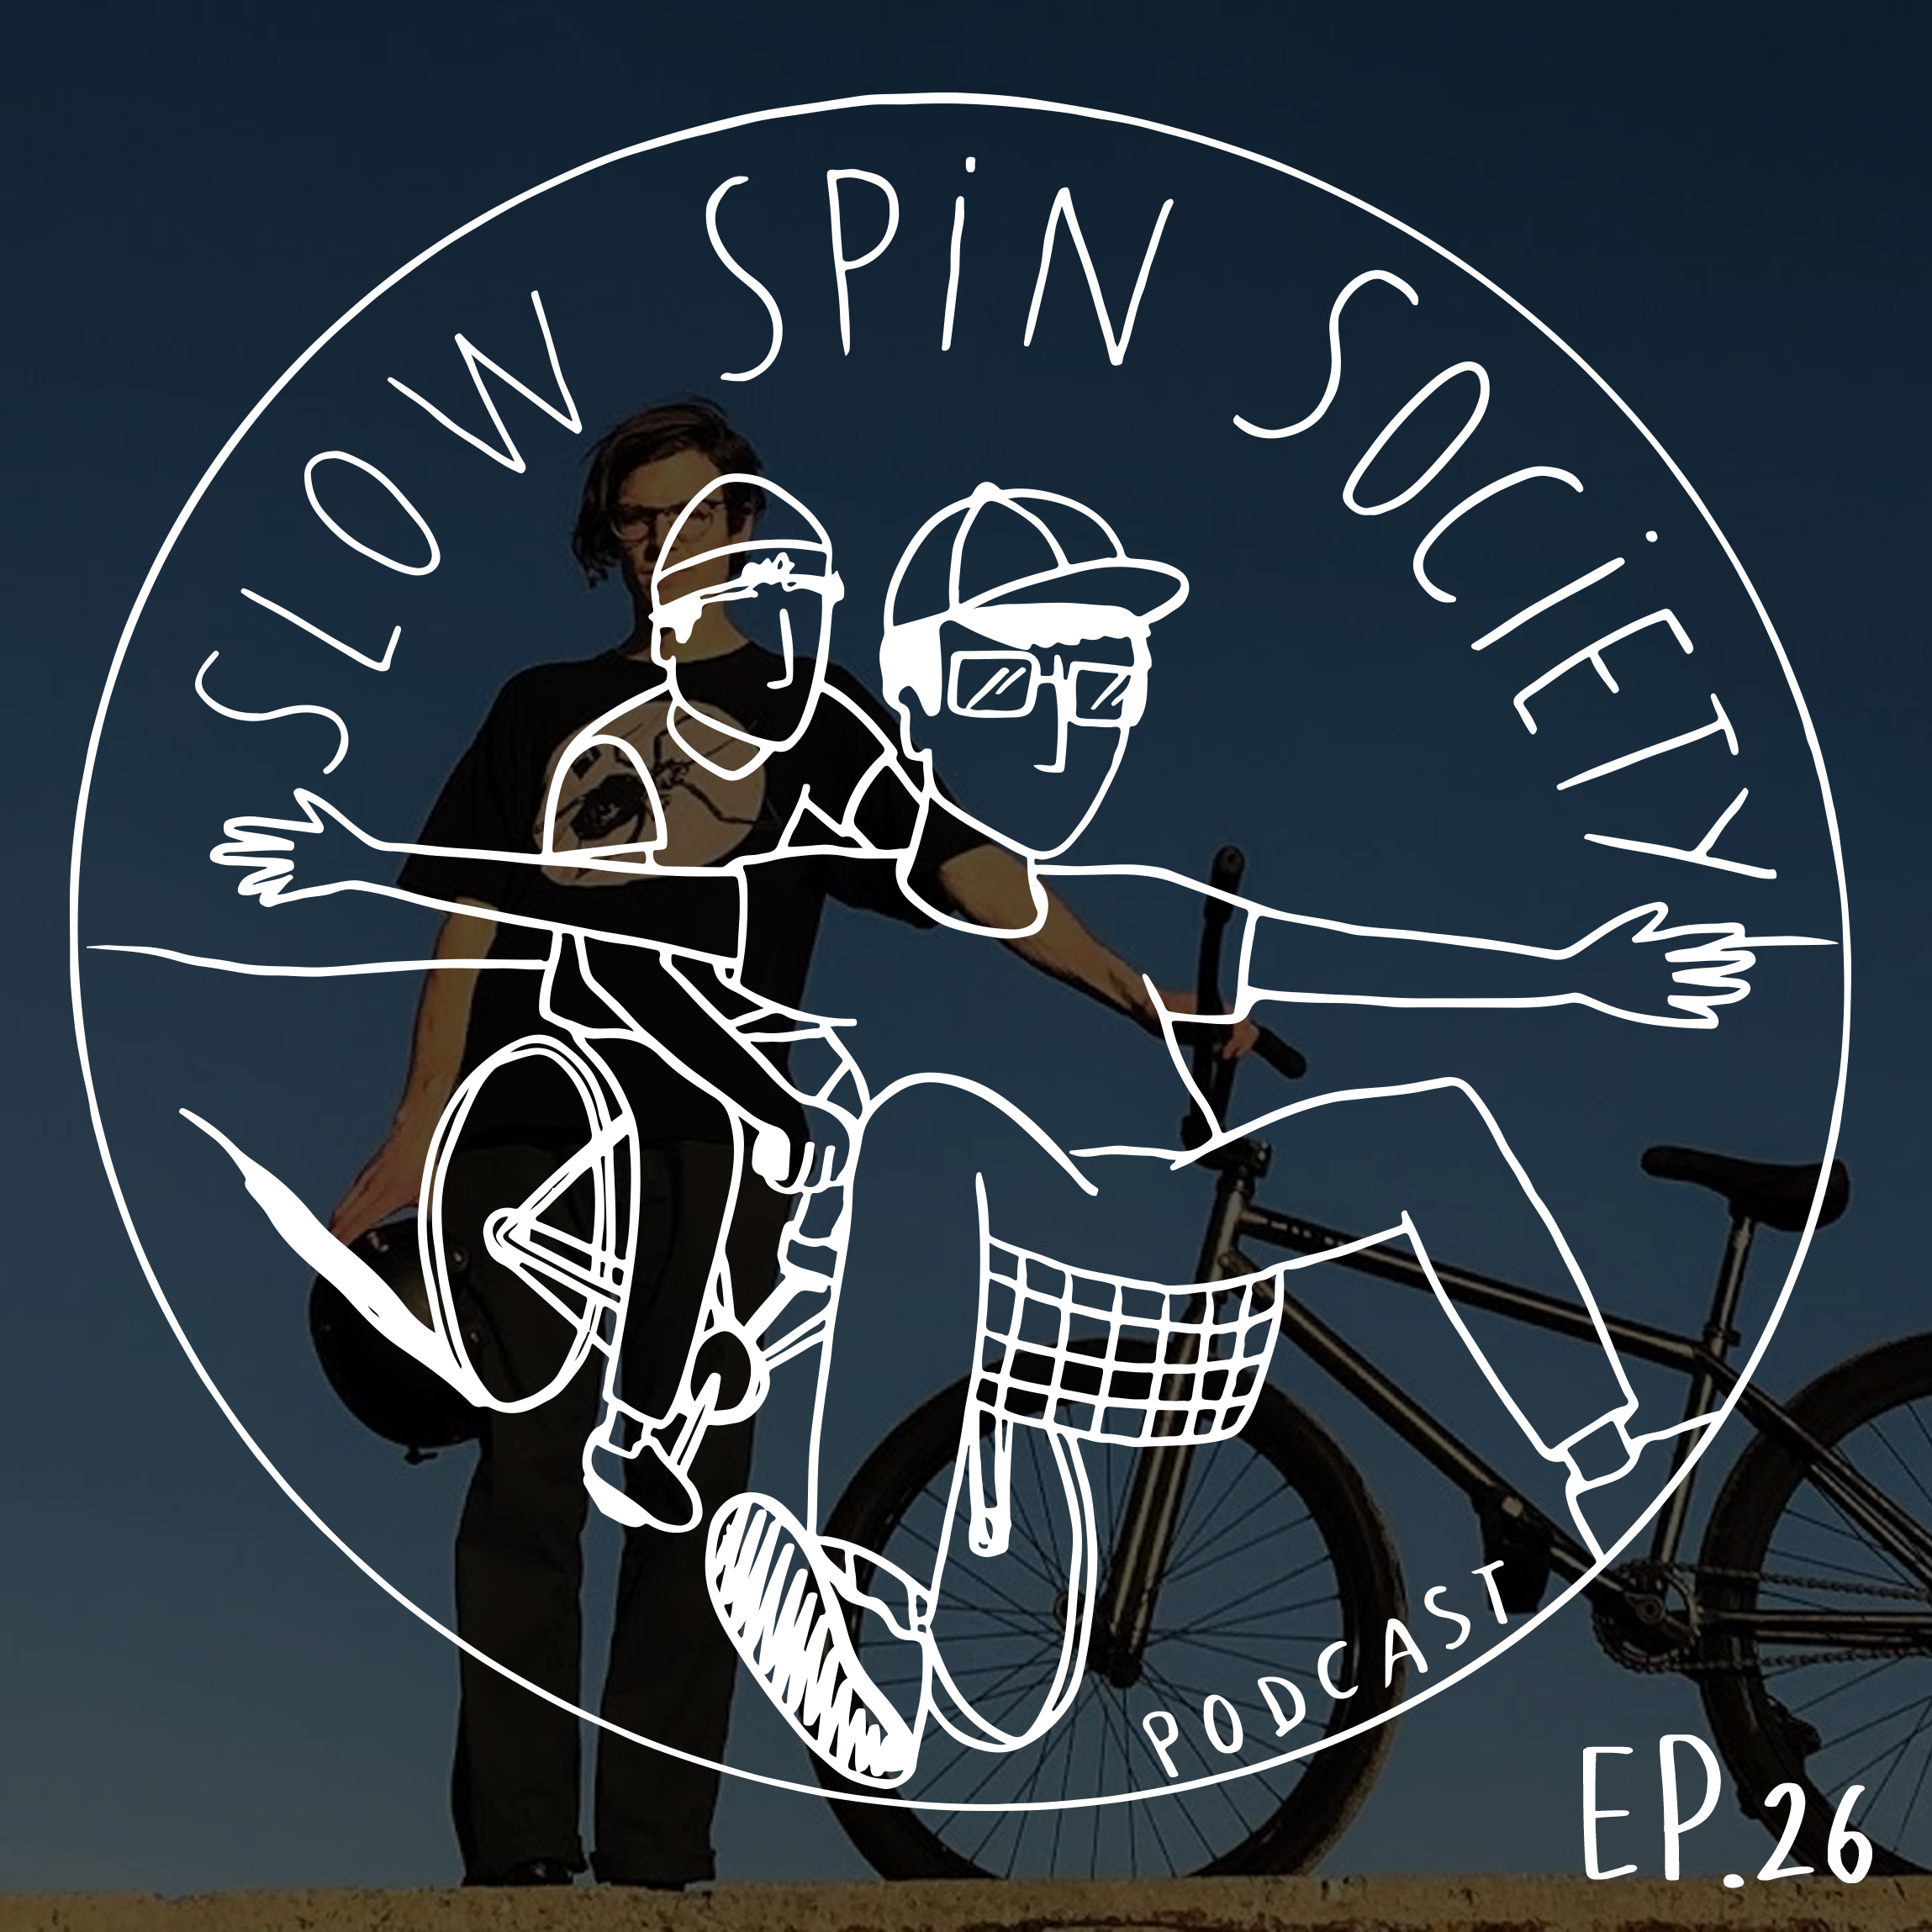 The Slow Spin Society Podcast Ep.26 : FGFS, FOAD Gang and Fixed-Gear edits with Jackson Bradshaw